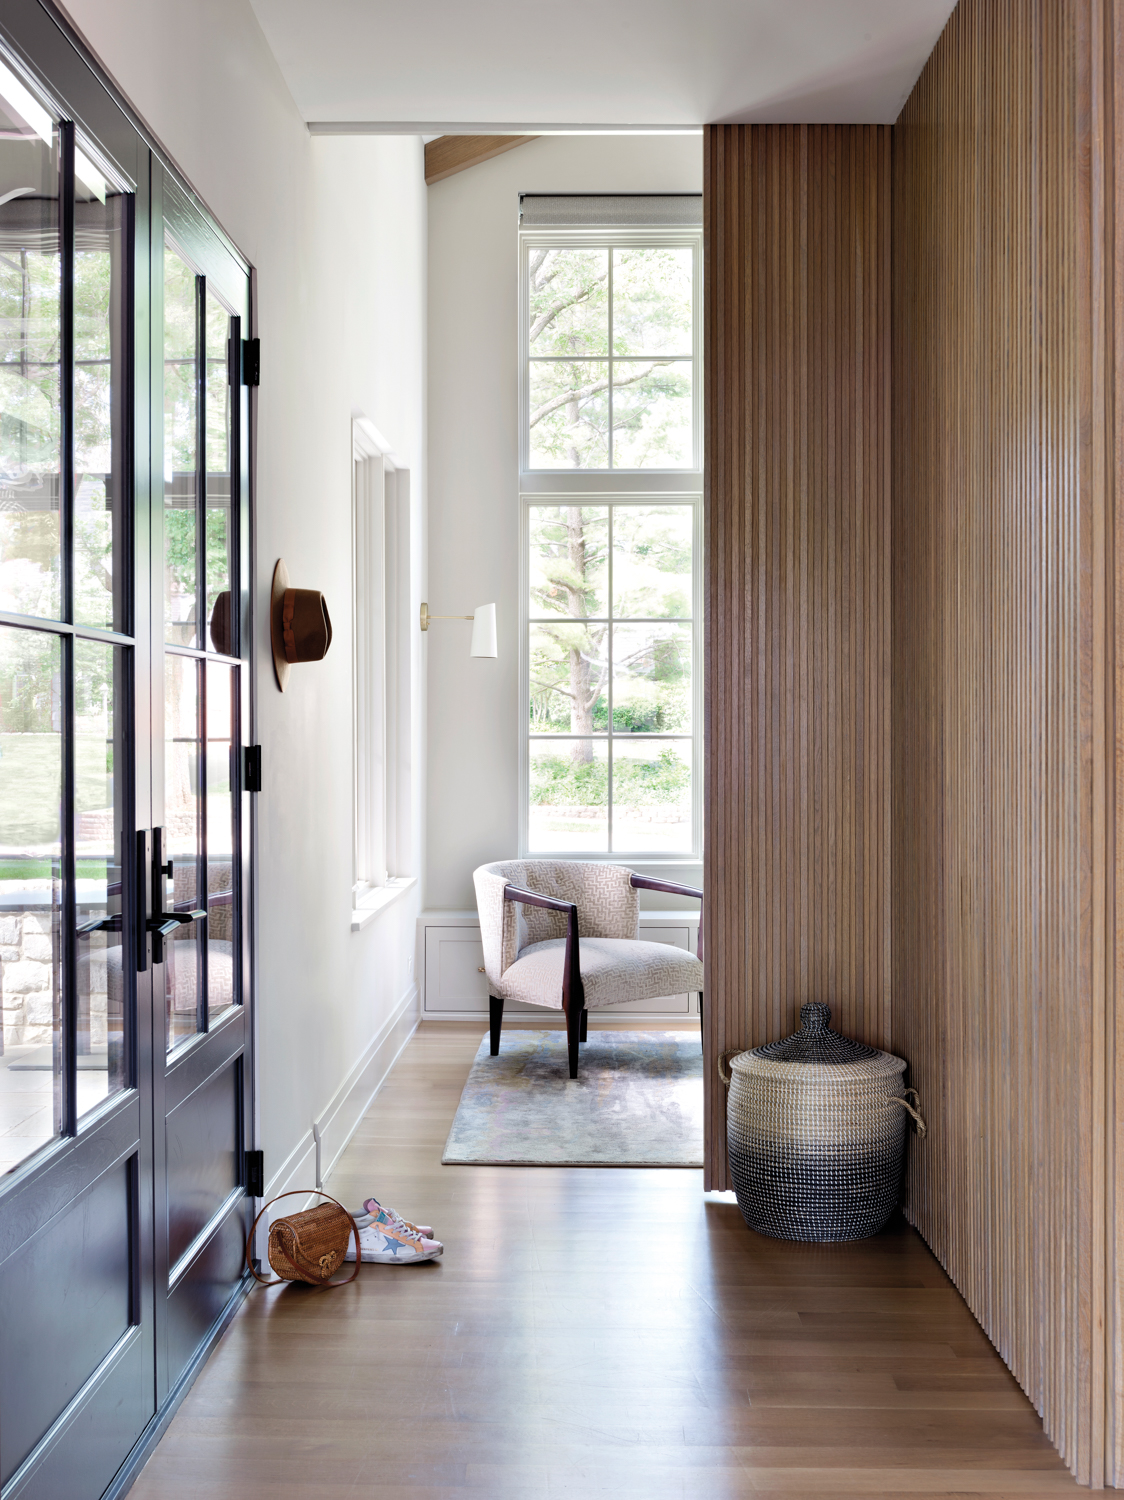 A wood paneled wall in...